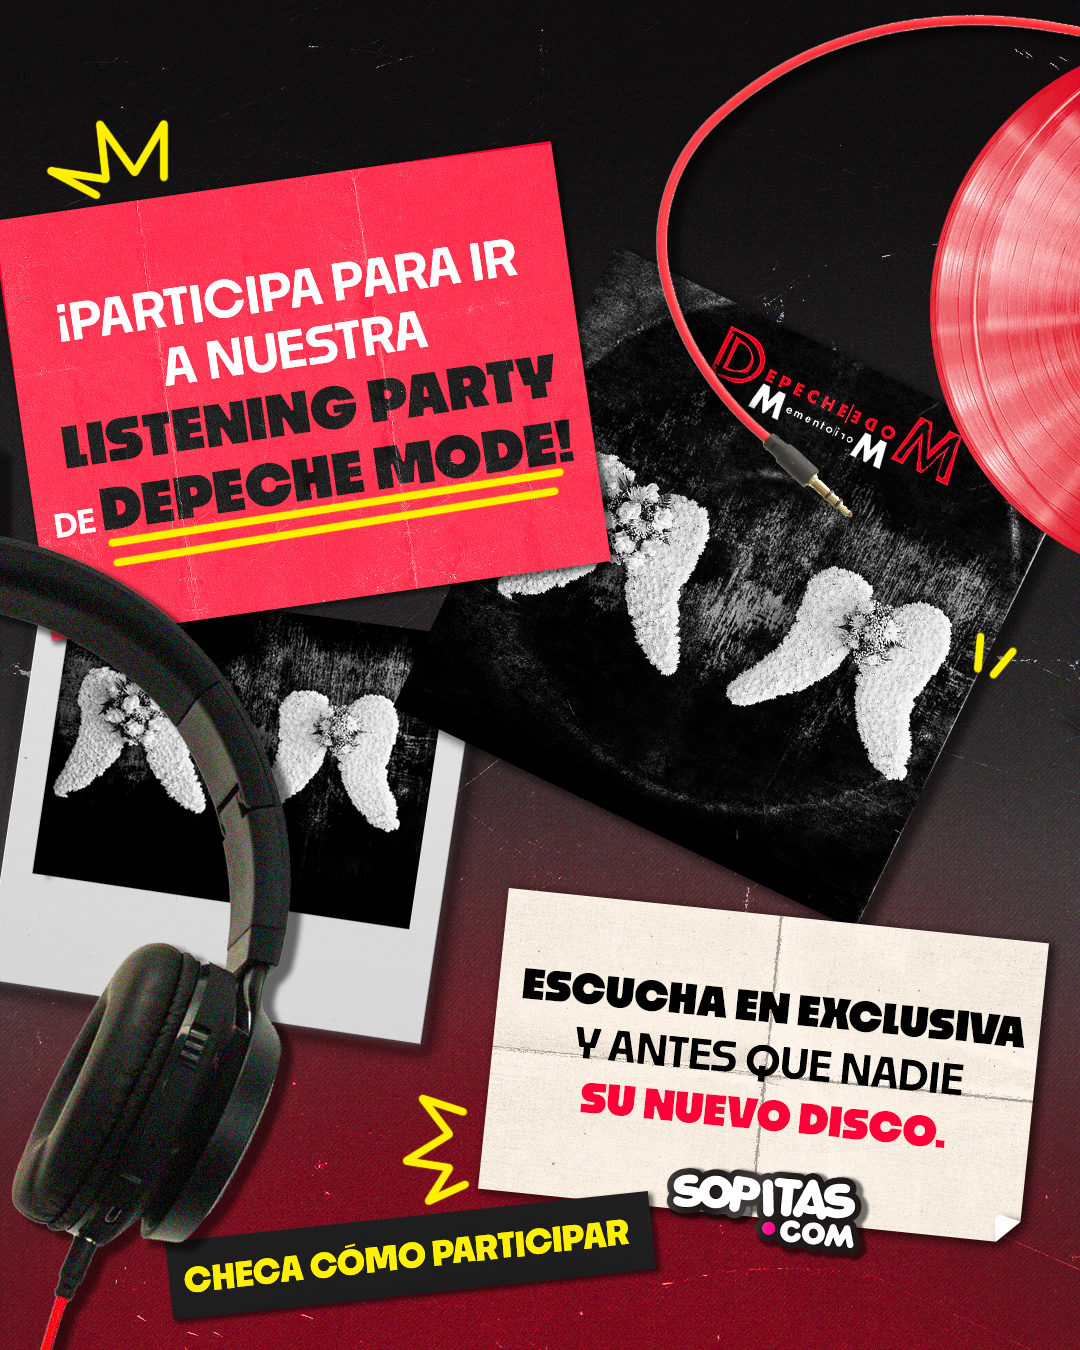 Dynamics to participate in the Depeche Mode listening party 